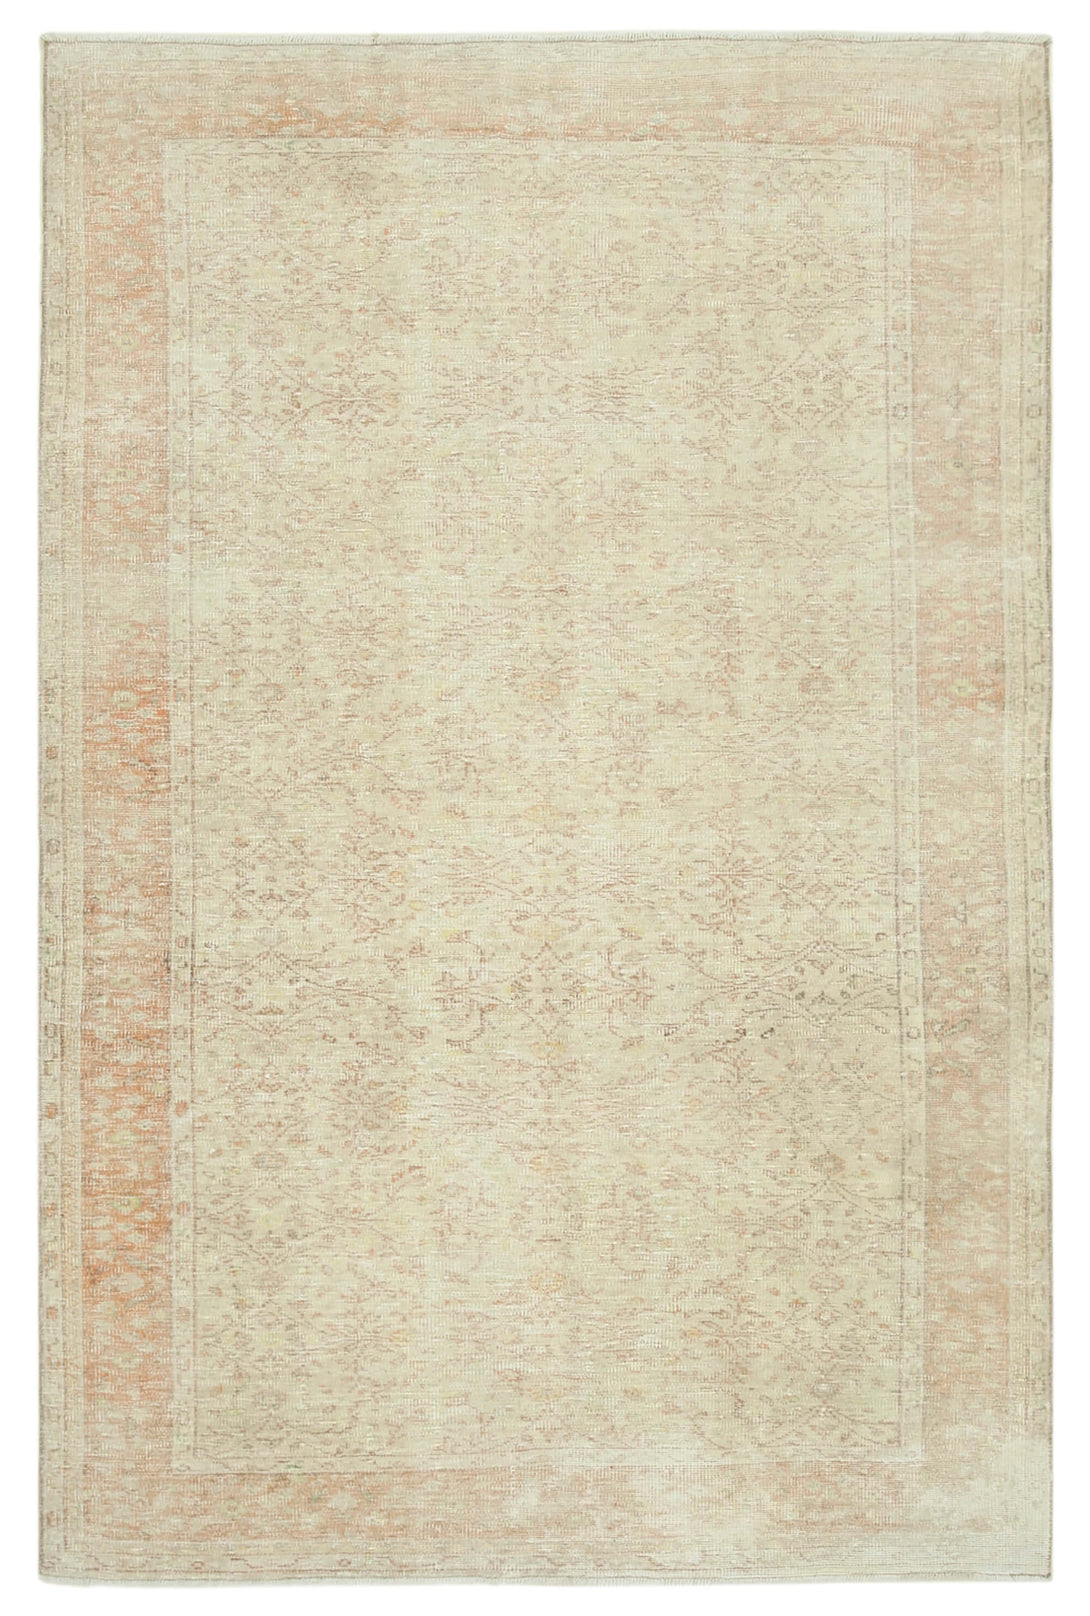 Handmade White Wash Area Rug > Design# OL-AC-38968 > Size: 5'-5" x 9'-5", Carpet Culture Rugs, Handmade Rugs, NYC Rugs, New Rugs, Shop Rugs, Rug Store, Outlet Rugs, SoHo Rugs, Rugs in USA